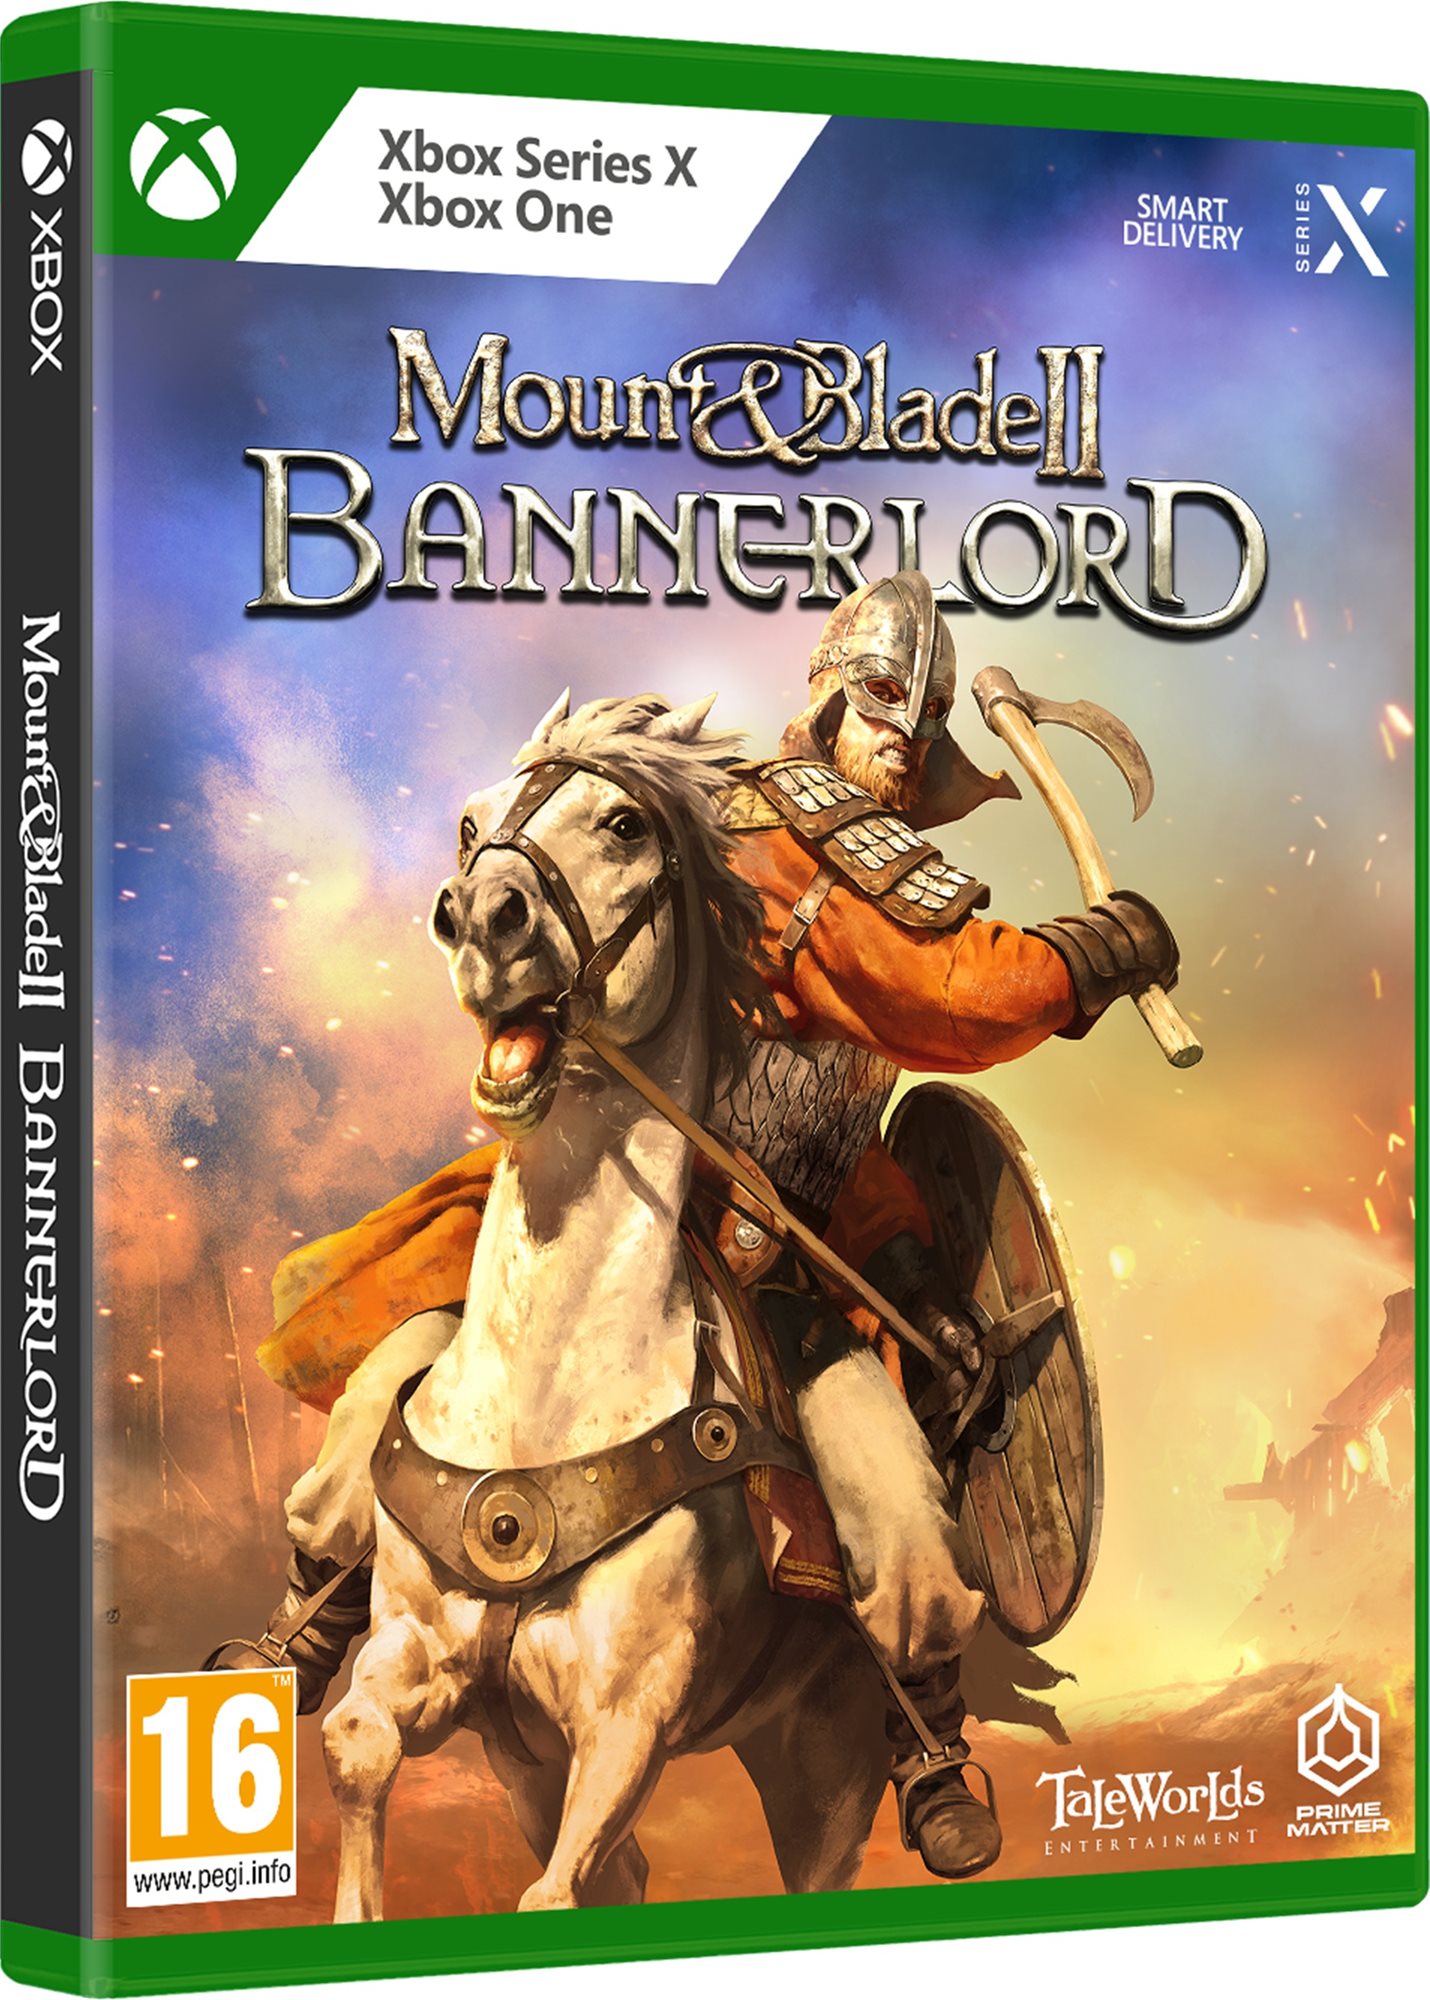 Mount and Blade II: Bannerlord - Xbox Series